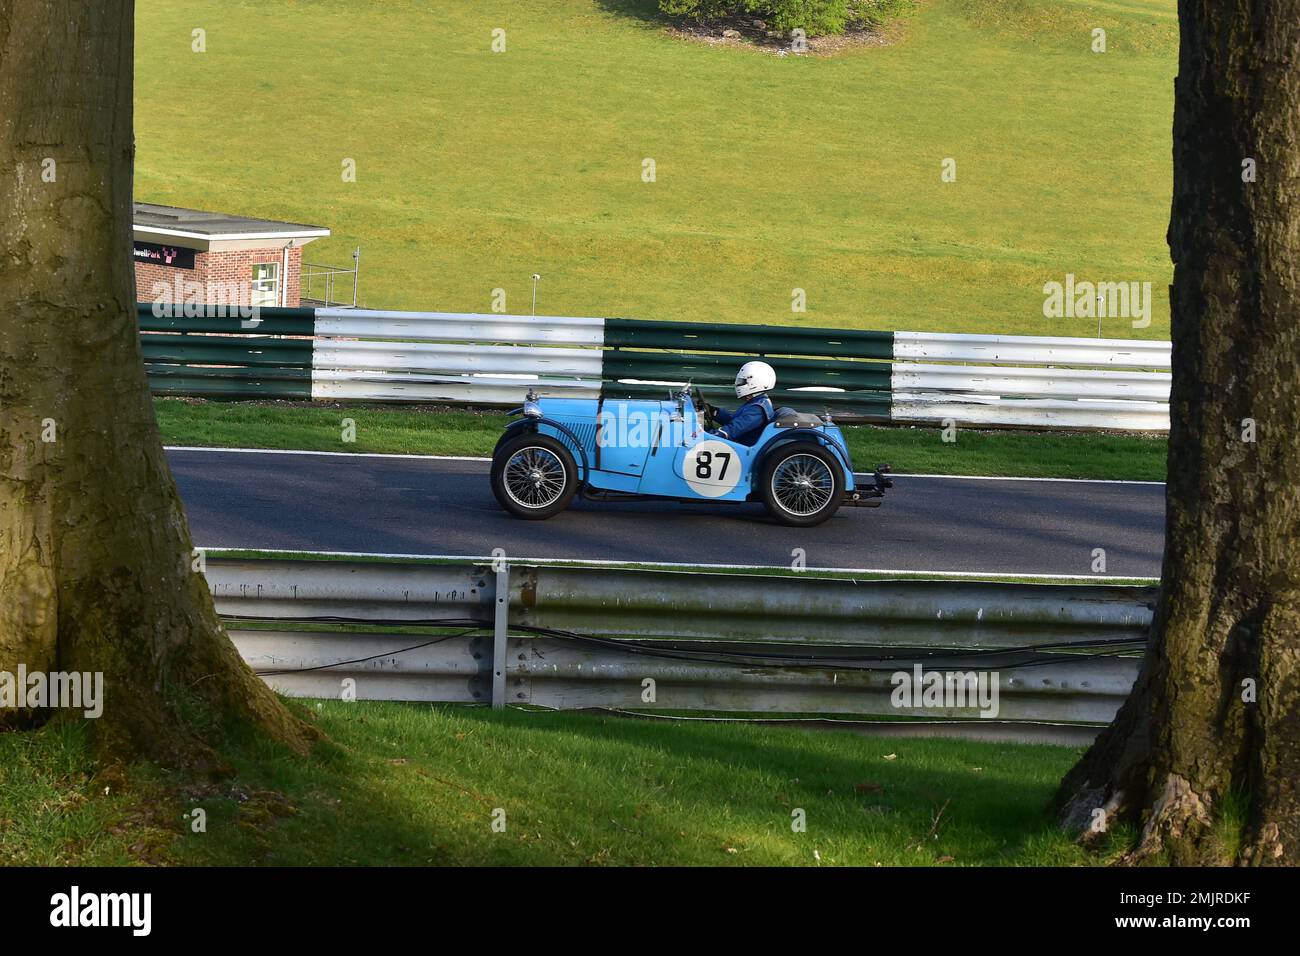 Simon Jackson, MG PB, Between the trees, Triple M Register Race for Pre-War MG Cars, fifteen minutes of racing for iconic MG Midget, Magna and Magnett Stock Photo